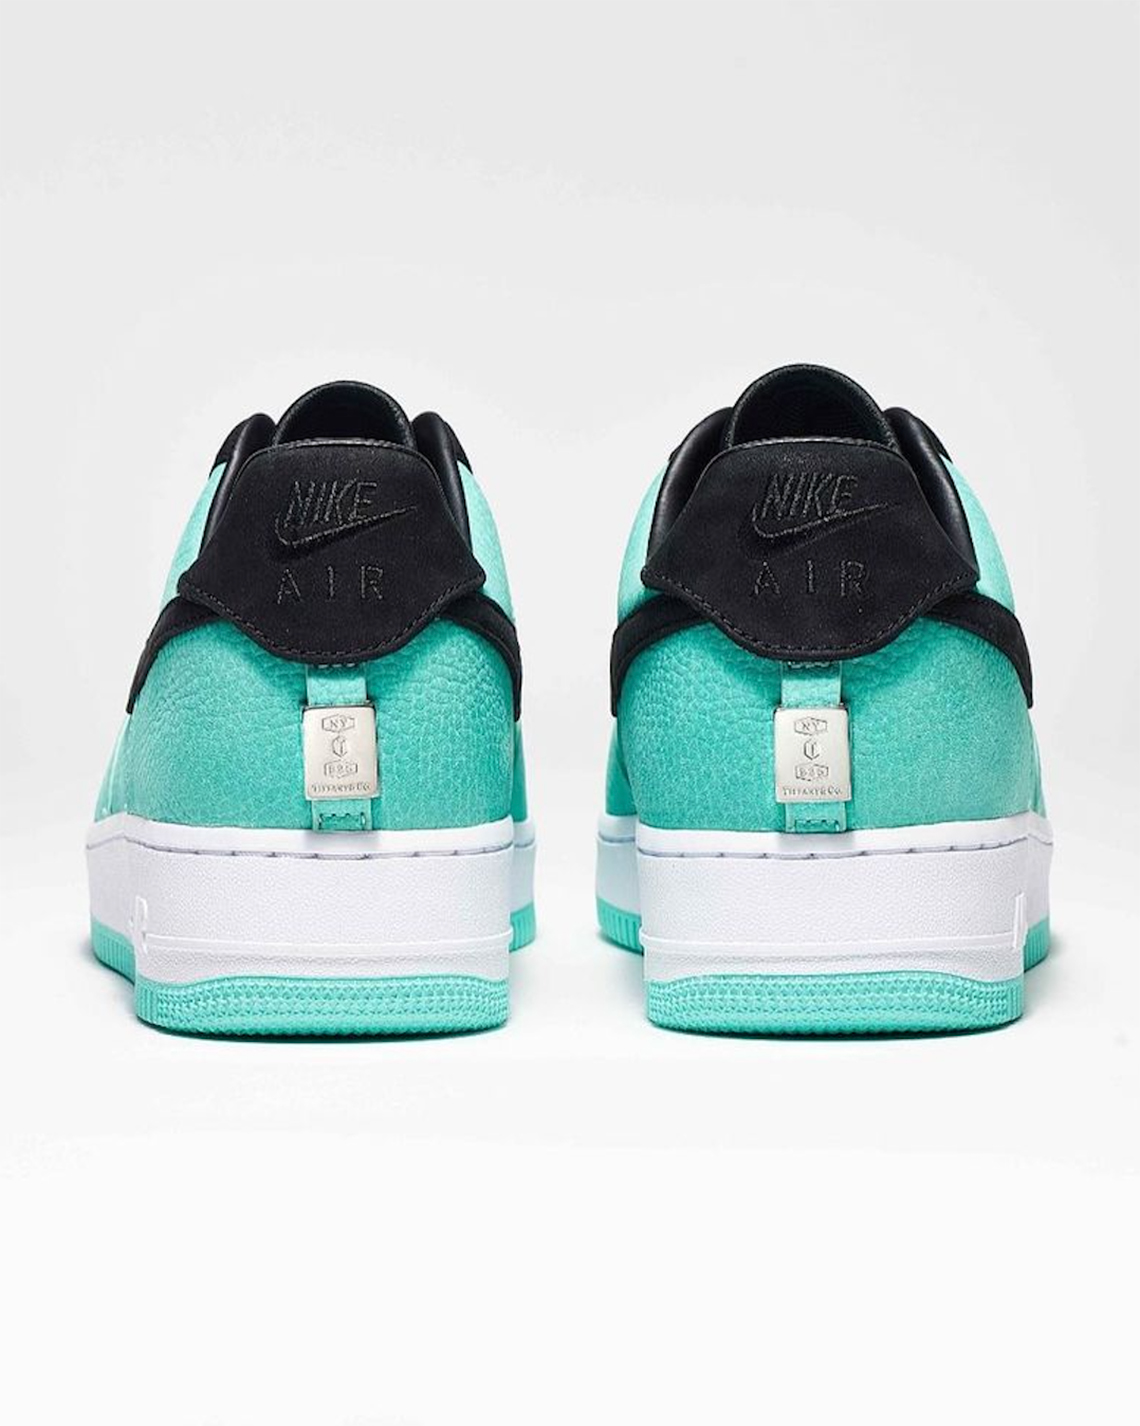 tiffany nike air force 1 friends and family blue 4